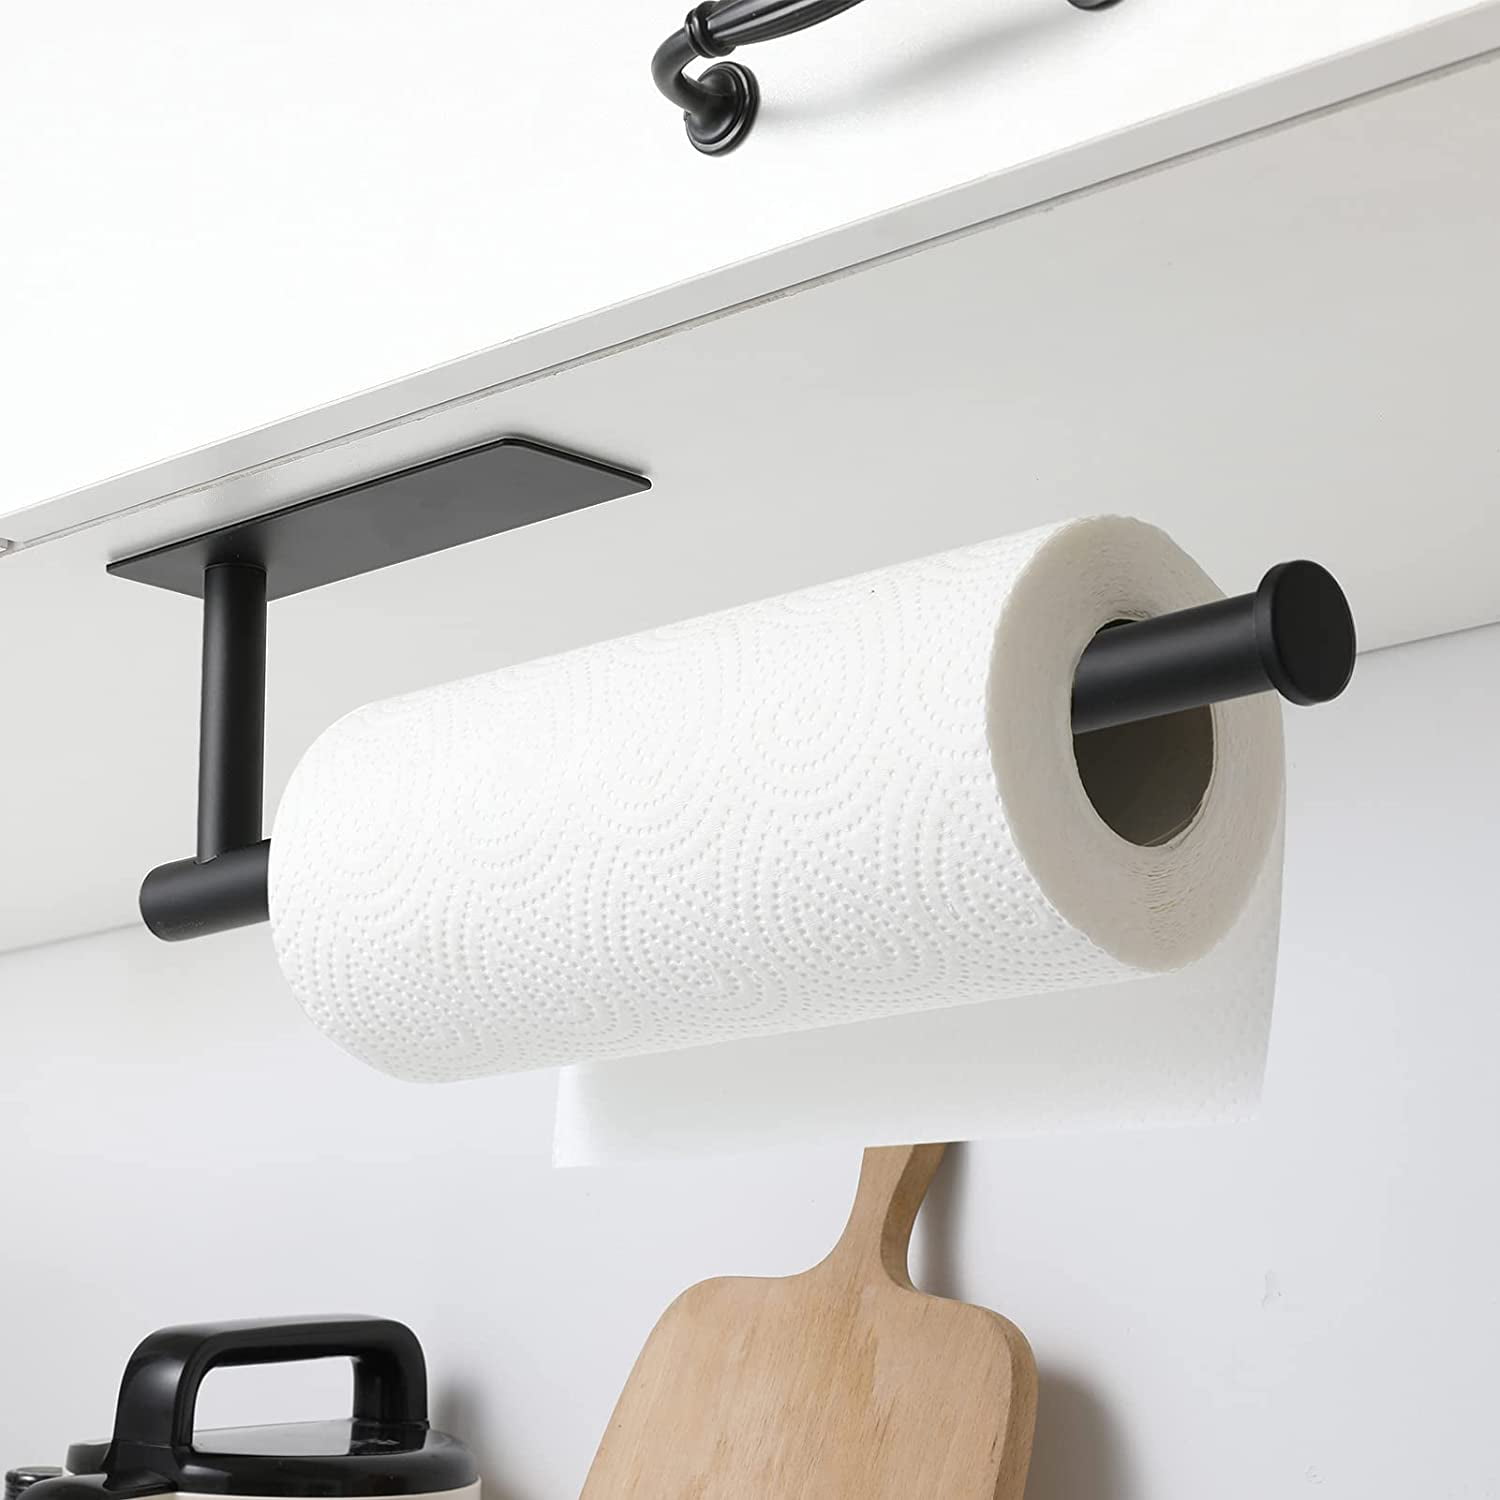 Cabinet Stainless Steel Paper Towel Holder in Matte Black (Pack of 2)